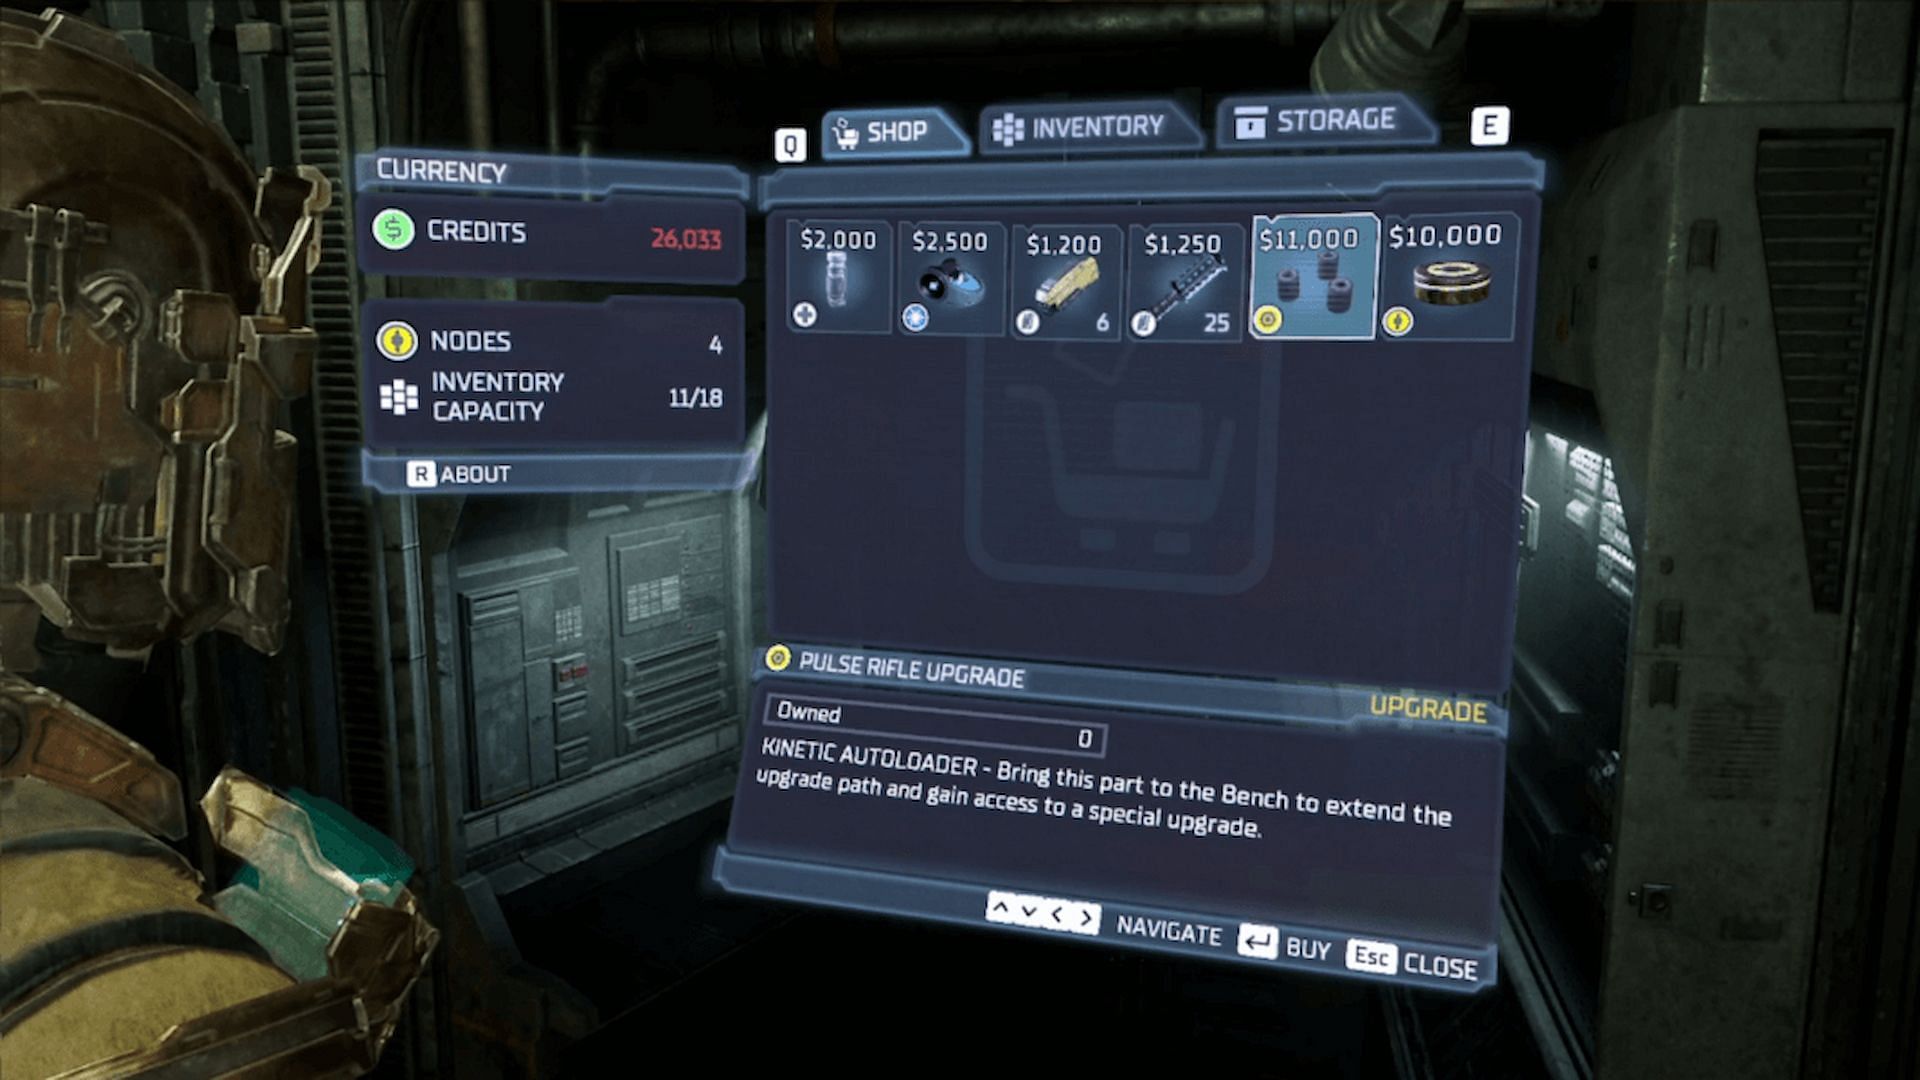 Purchase the Kinetic Autoloader from the in-game store (Image via EA Motive)